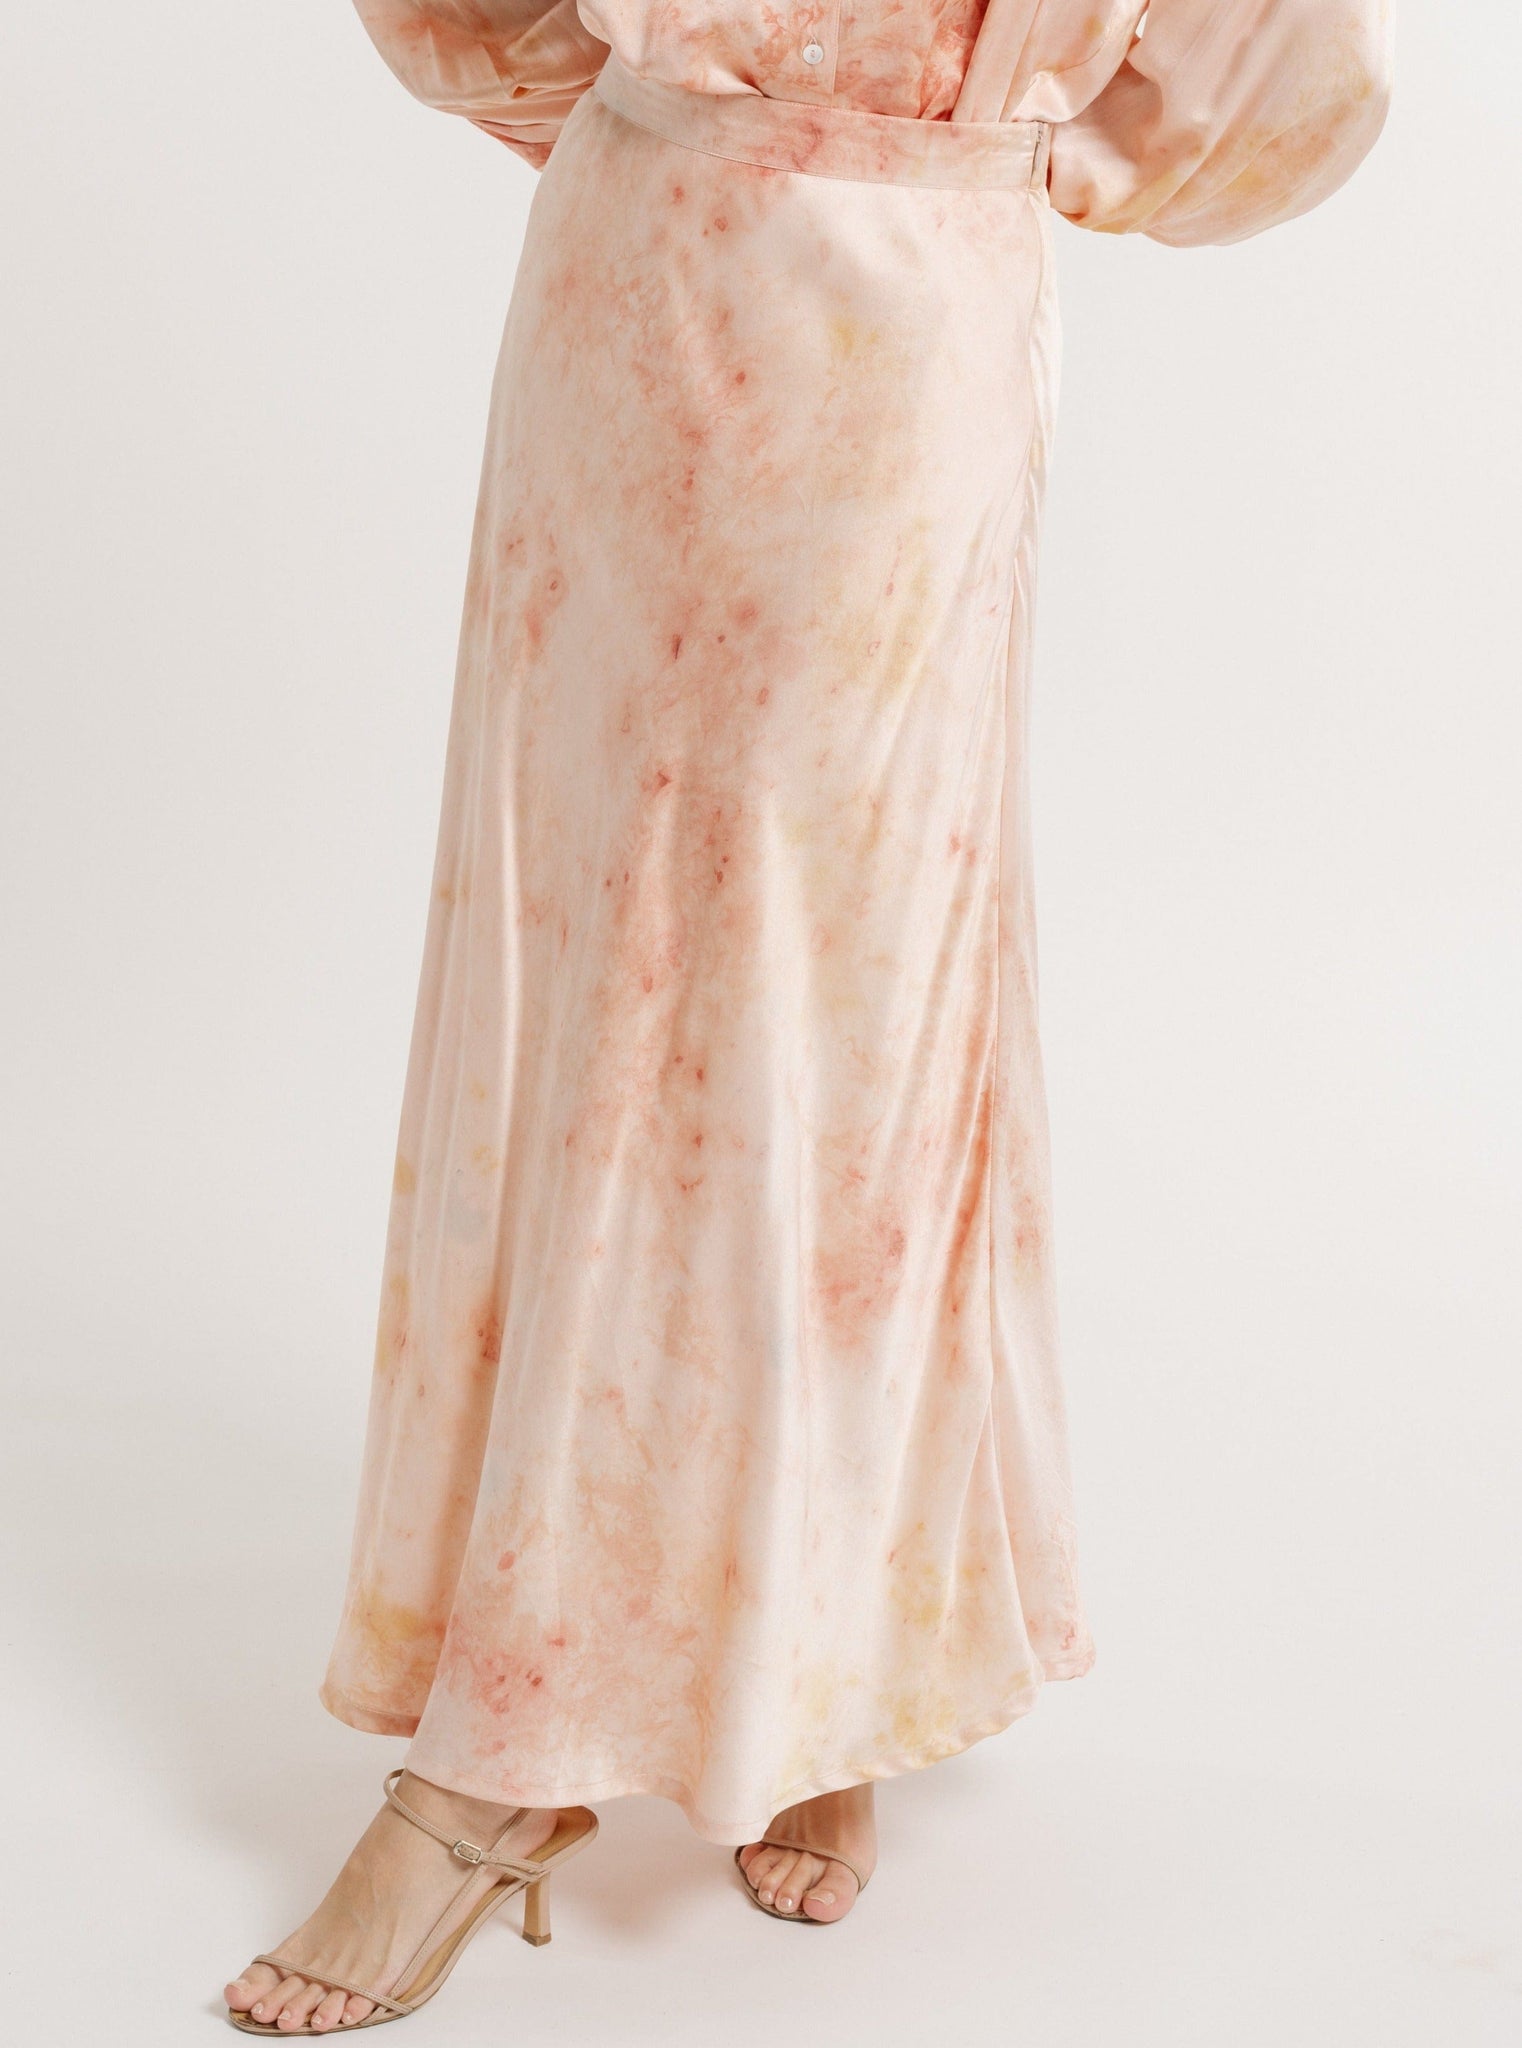 A person standing in a Peach-colored, Silk Midi Slip Skirt - Botanical Ice Dye with gold strappy high heels.